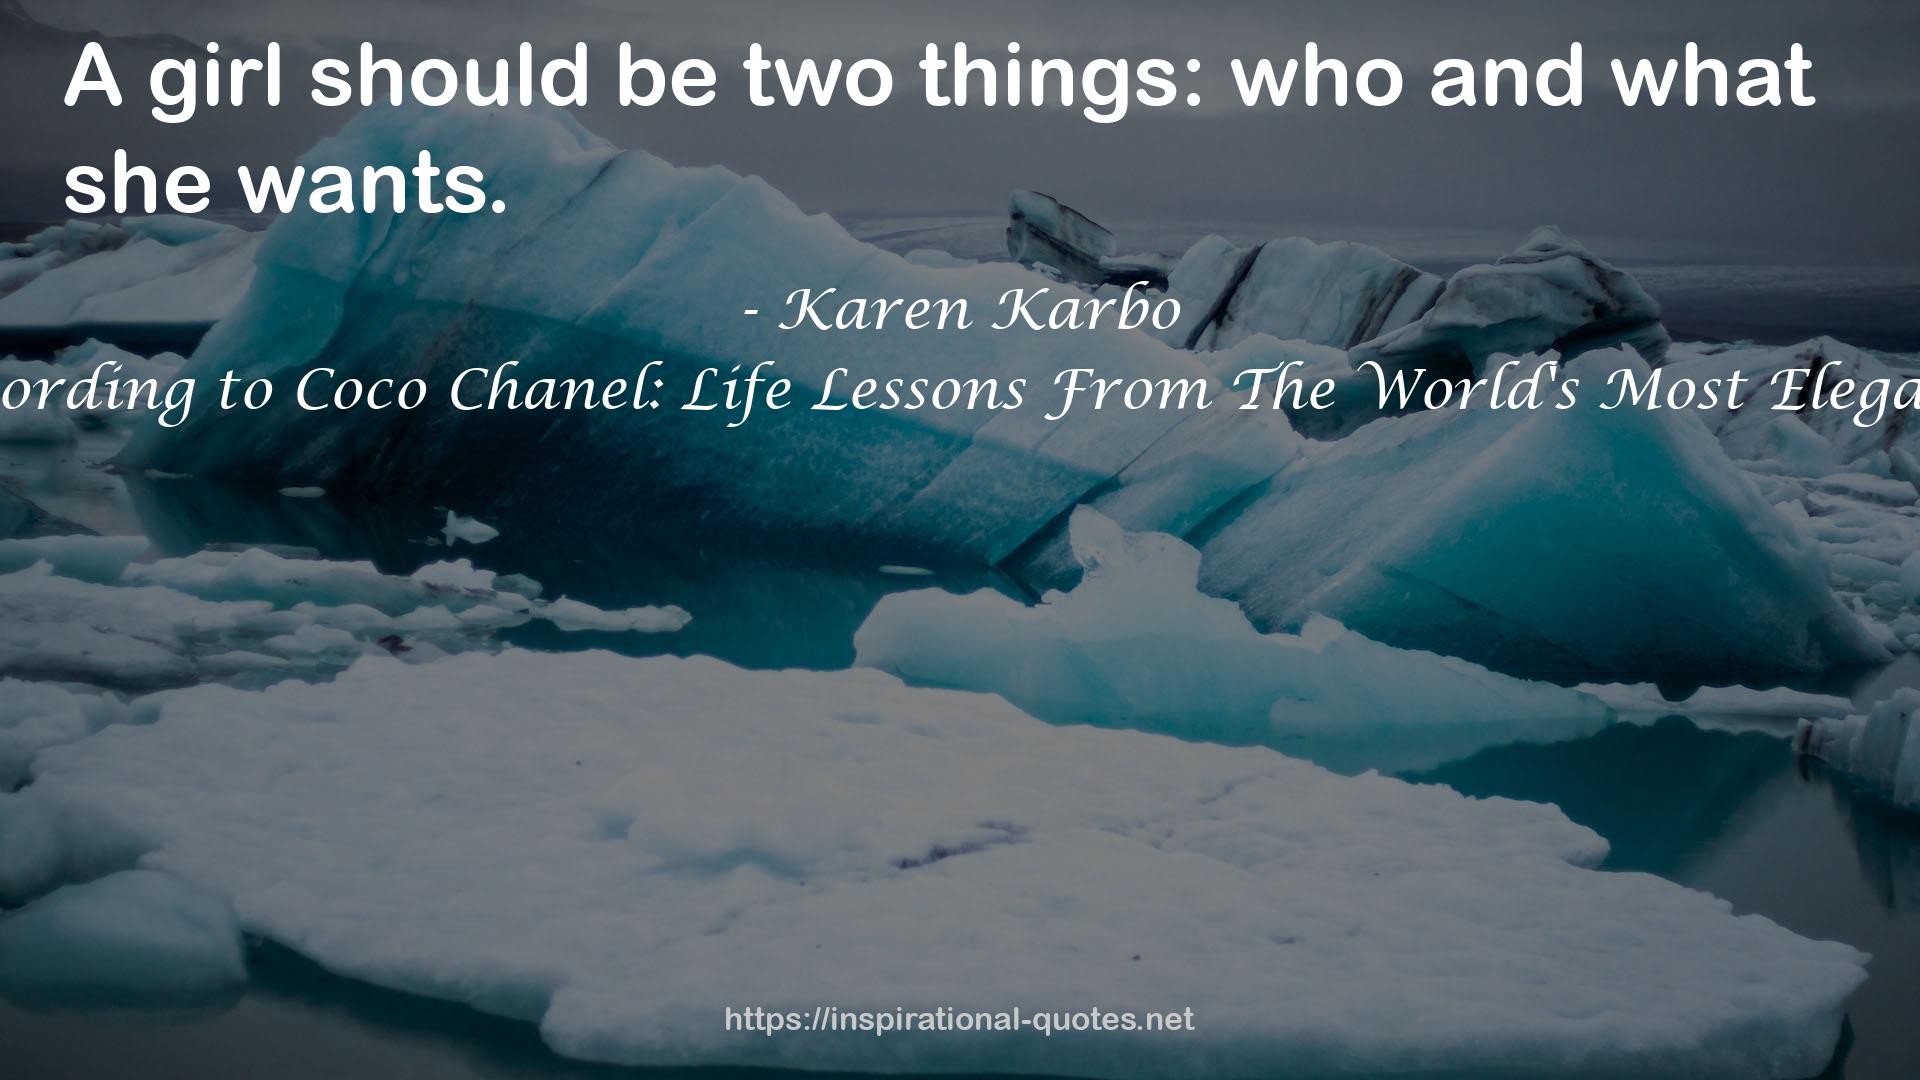 Gospel According to Coco Chanel: Life Lessons From The World's Most Elegant Woman QUOTES